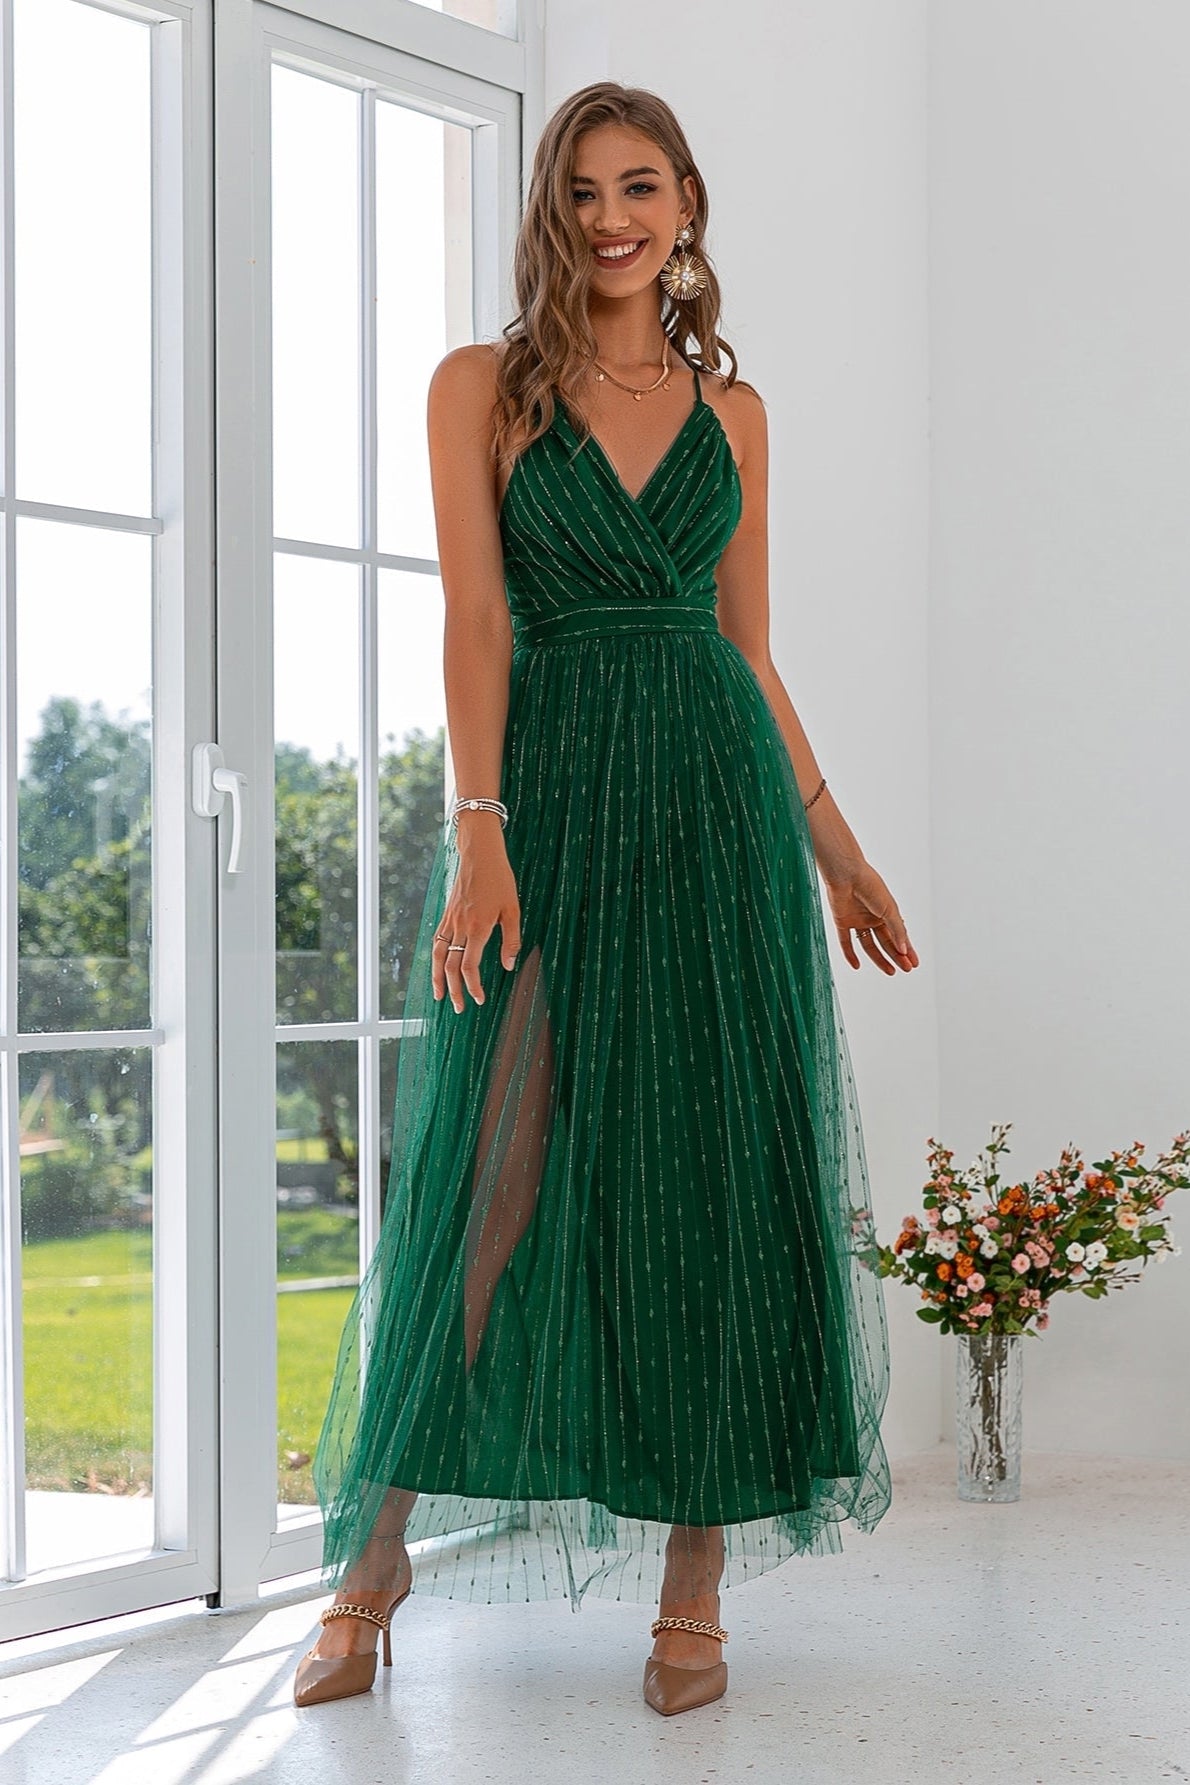 Boho Cocktail & Formal Dresses | Bohemian, Country & Vintage Style Page 2